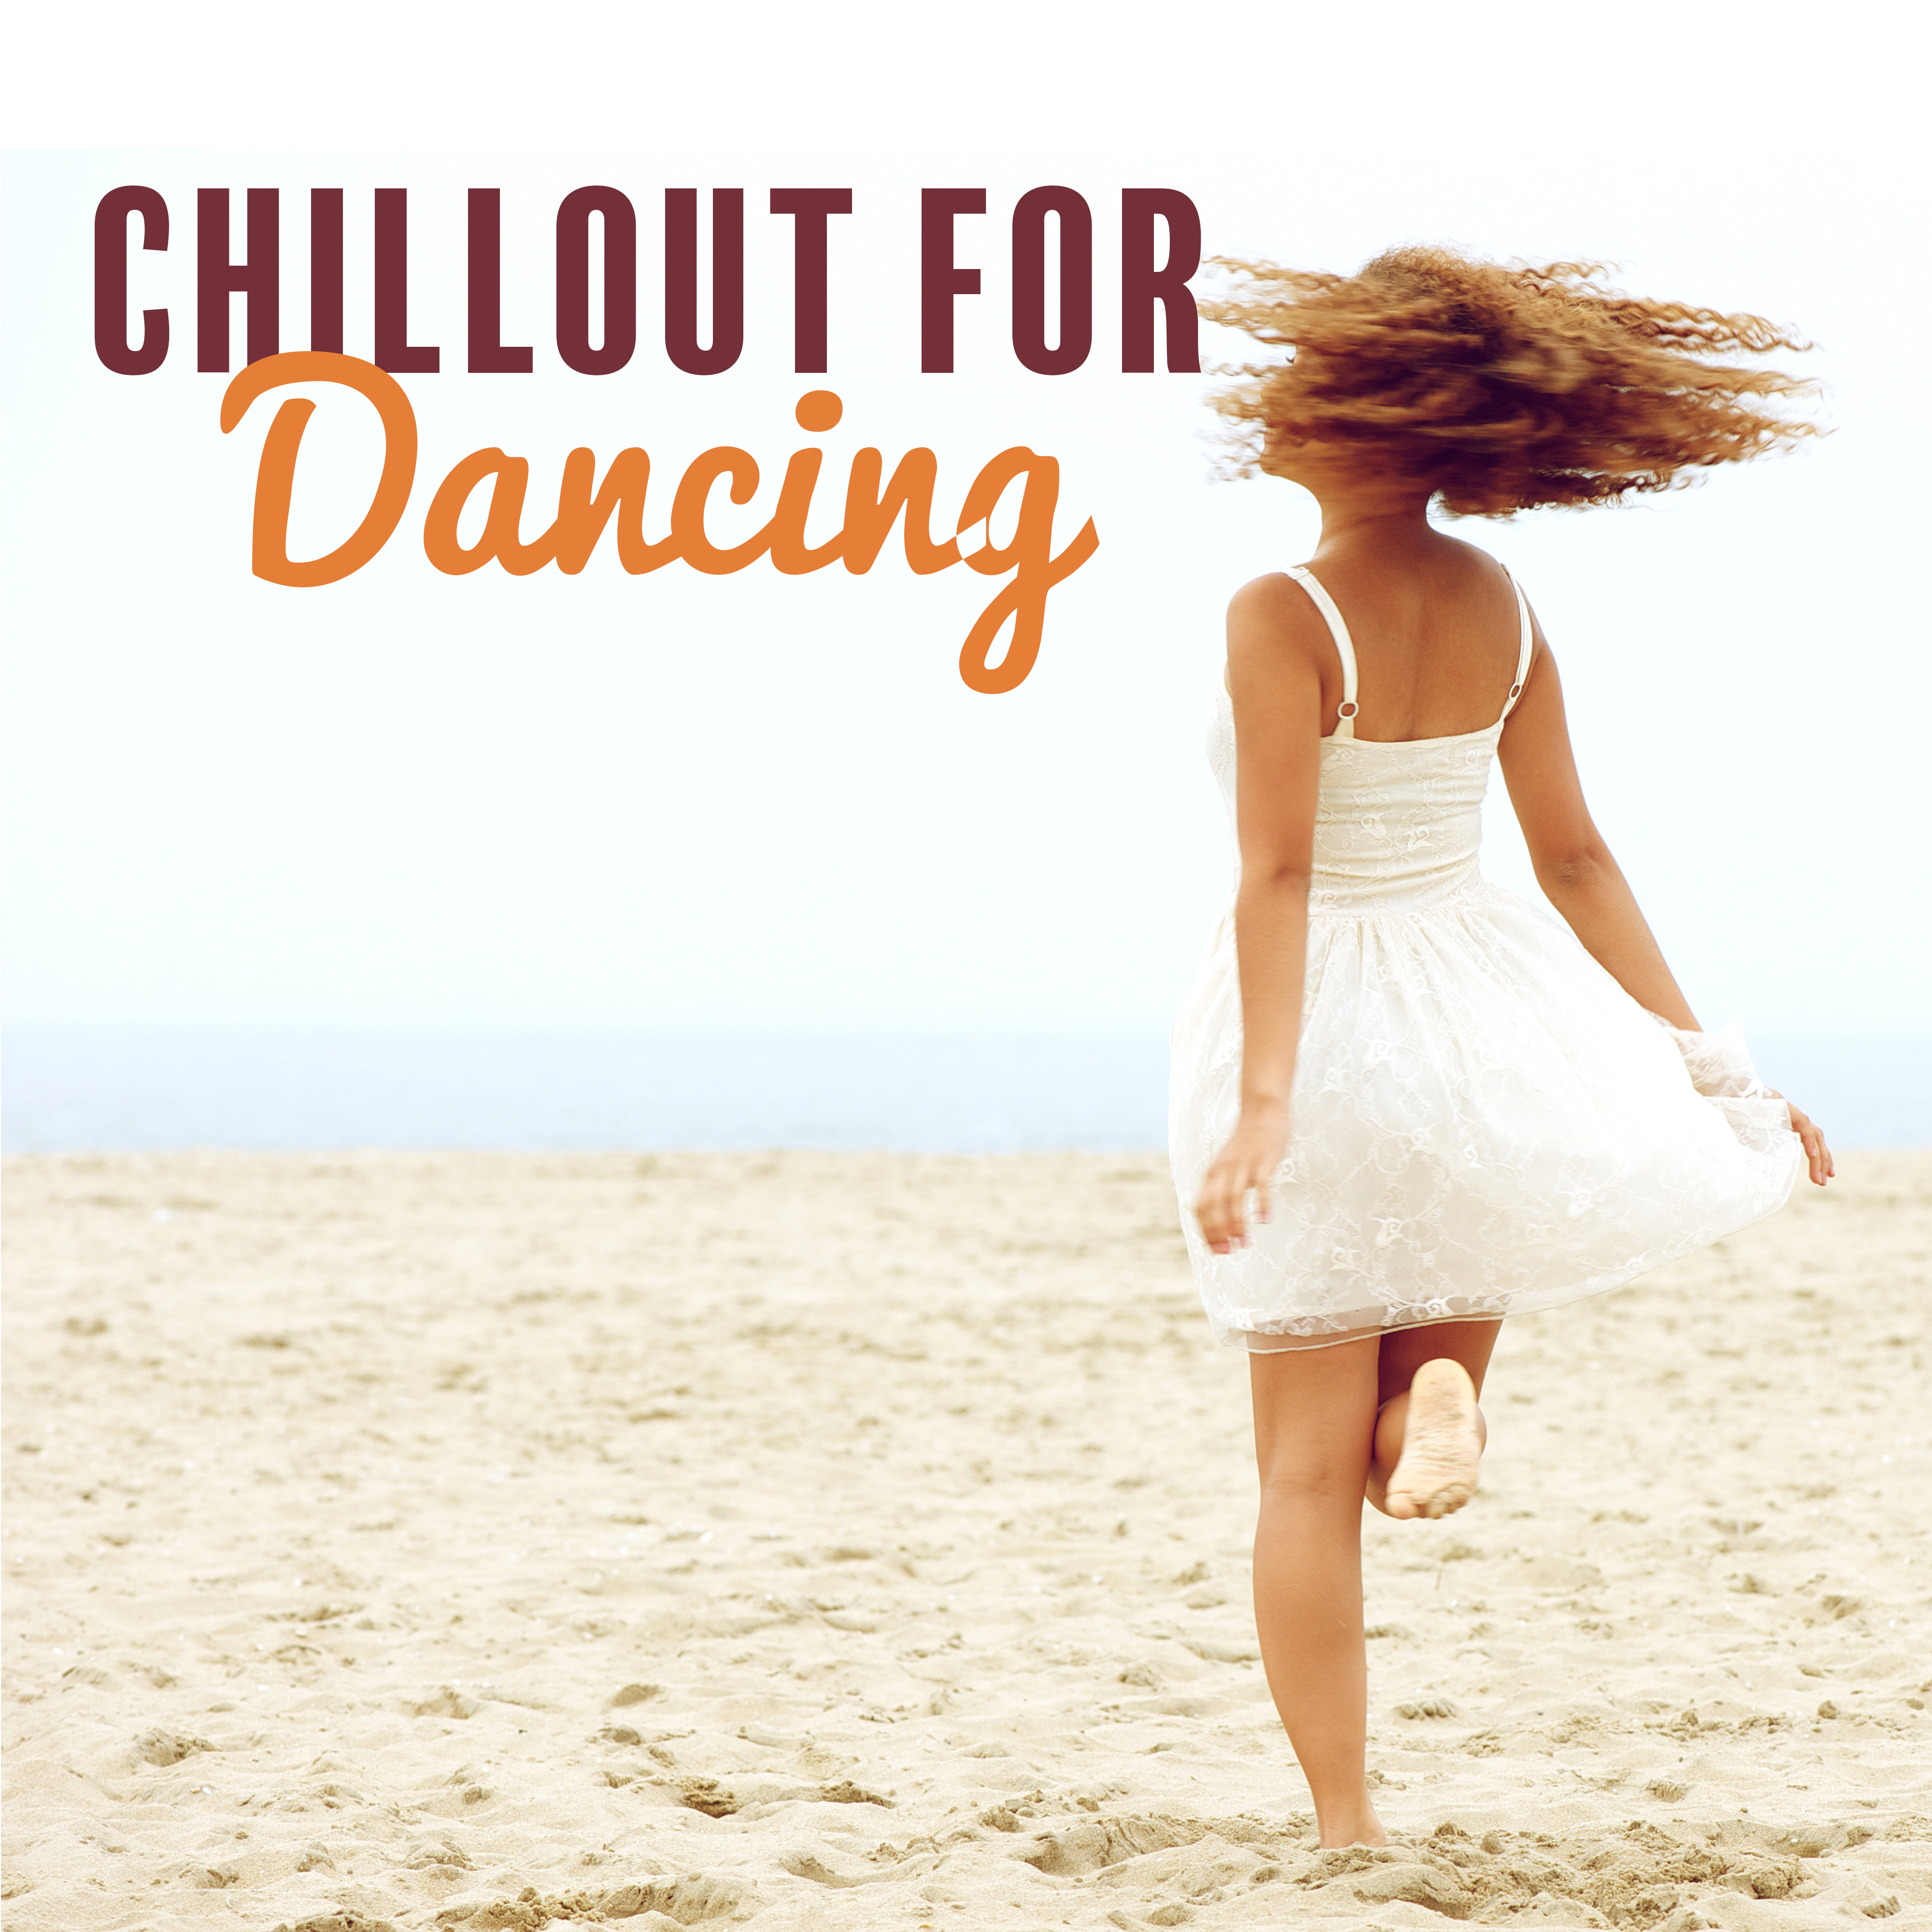 Chillout for Dancing – Club Dancefloor Beats for Best Party on Earth